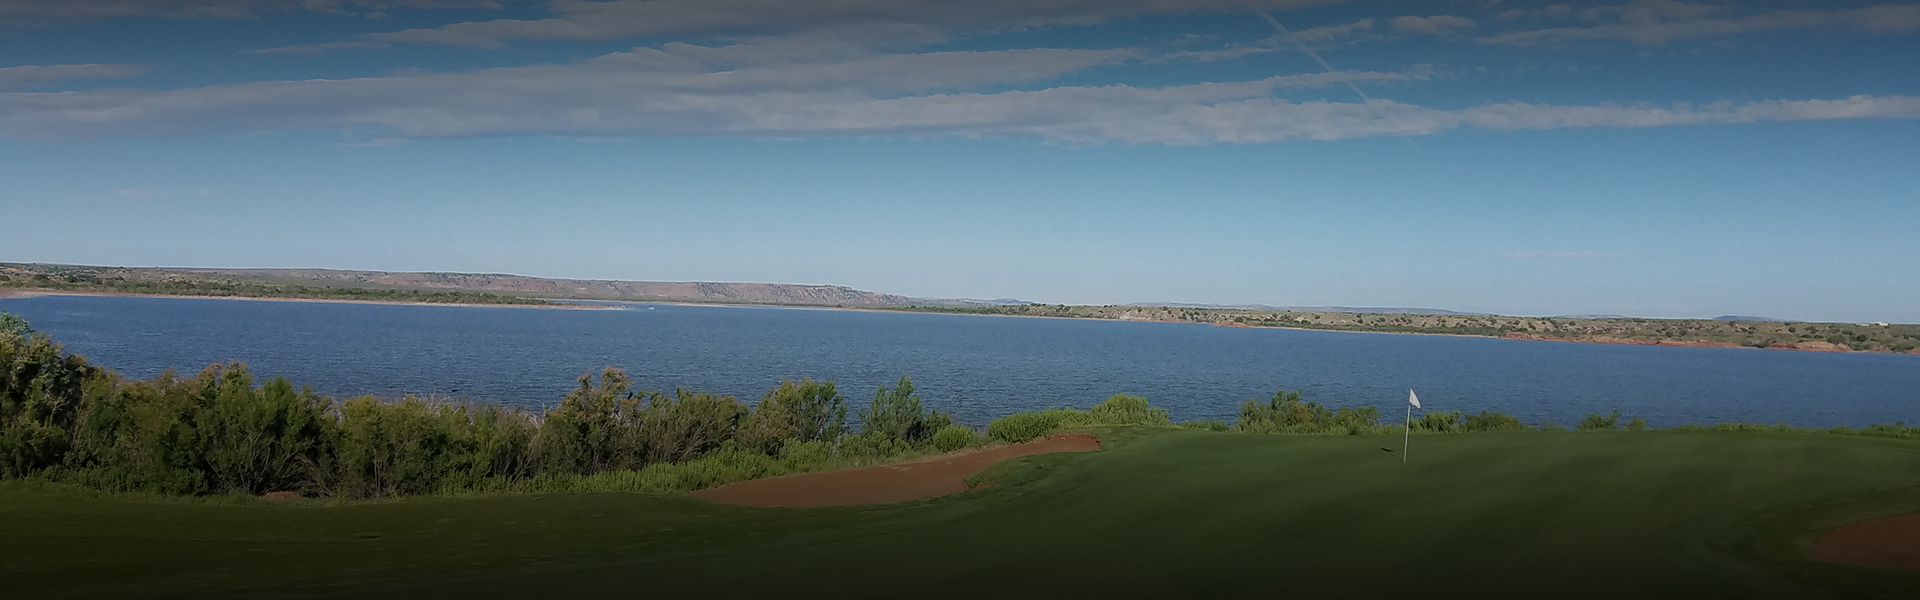 a dim image of clear blue skies over a large lake and golf course with small bushes lining the shore